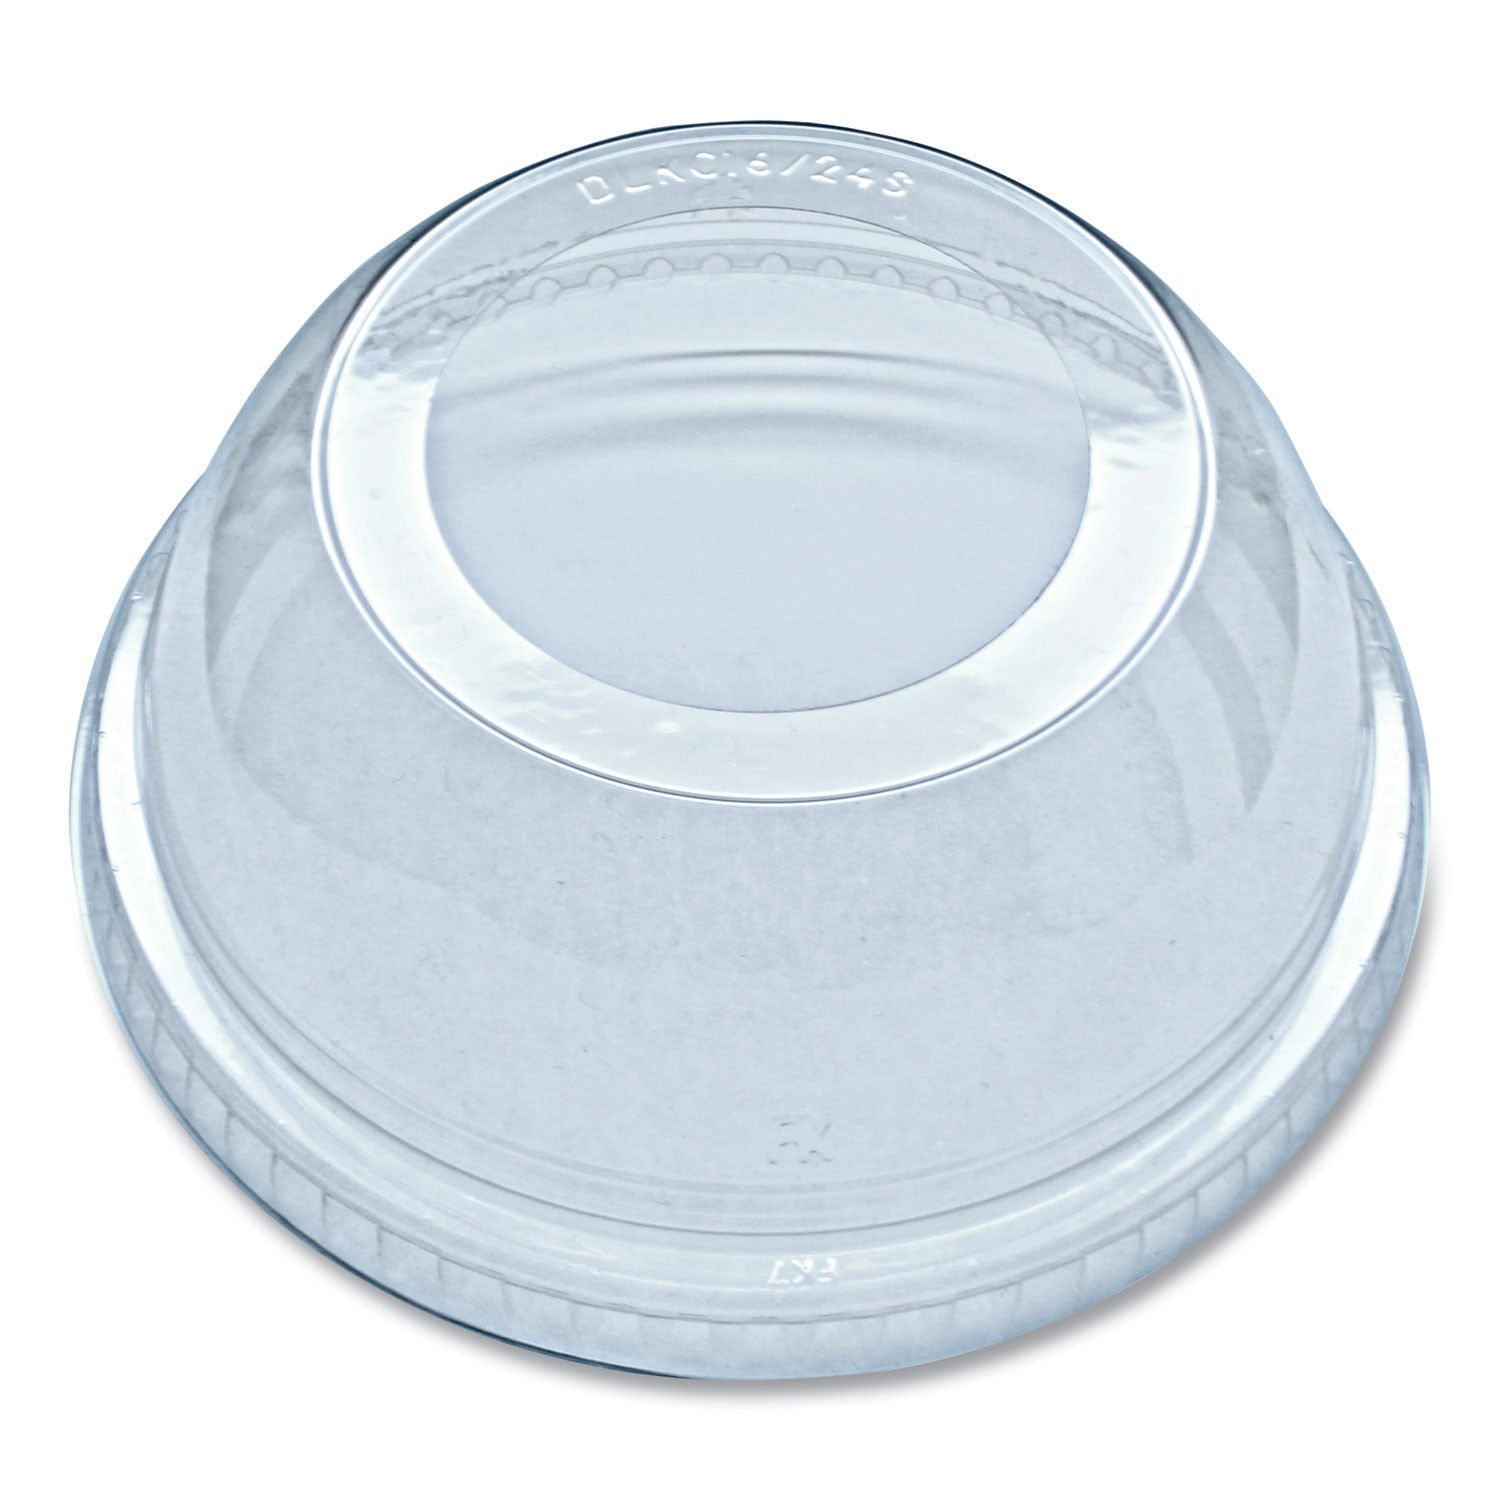 greenware-cold-drink-lids-fits-16-oz-to-24-oz-clear-1000-carton_fabdlkc1624s - 1